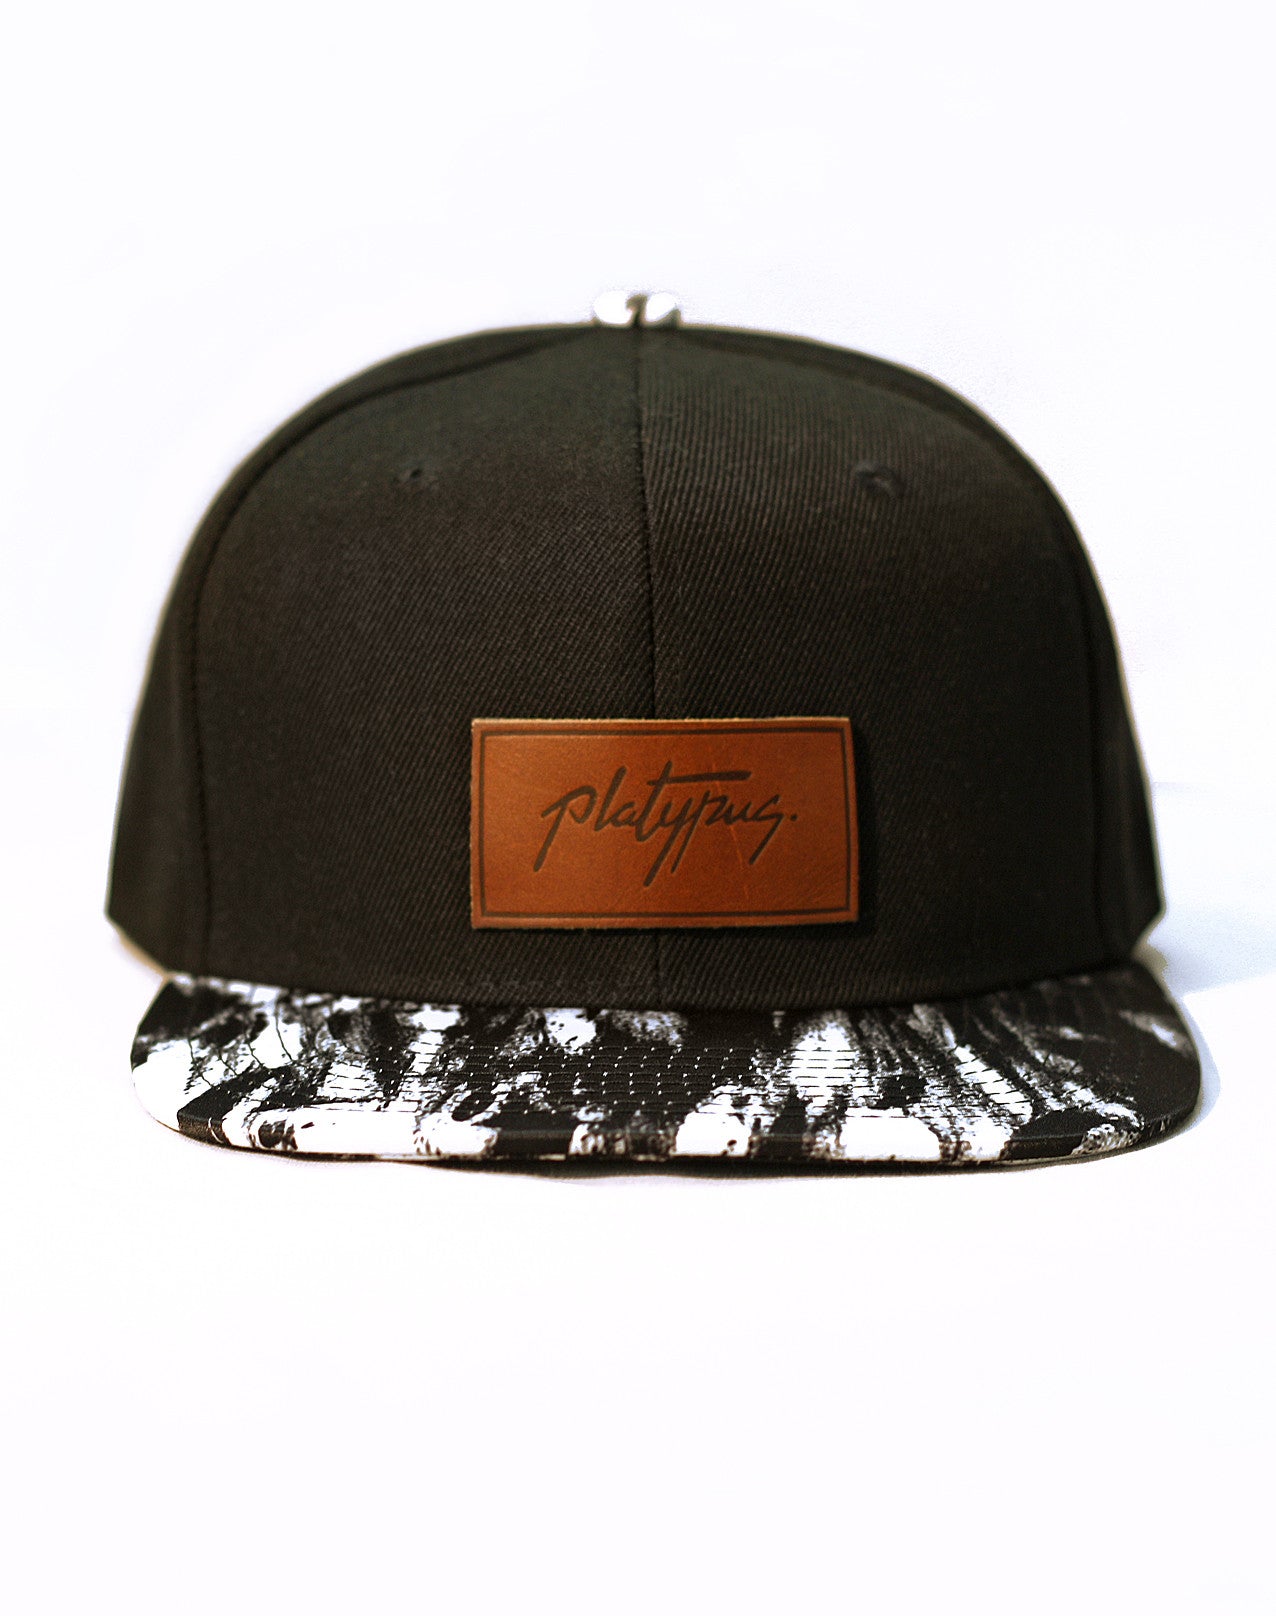 Black and White Charcoal Pattern Platypus Snapback Cap